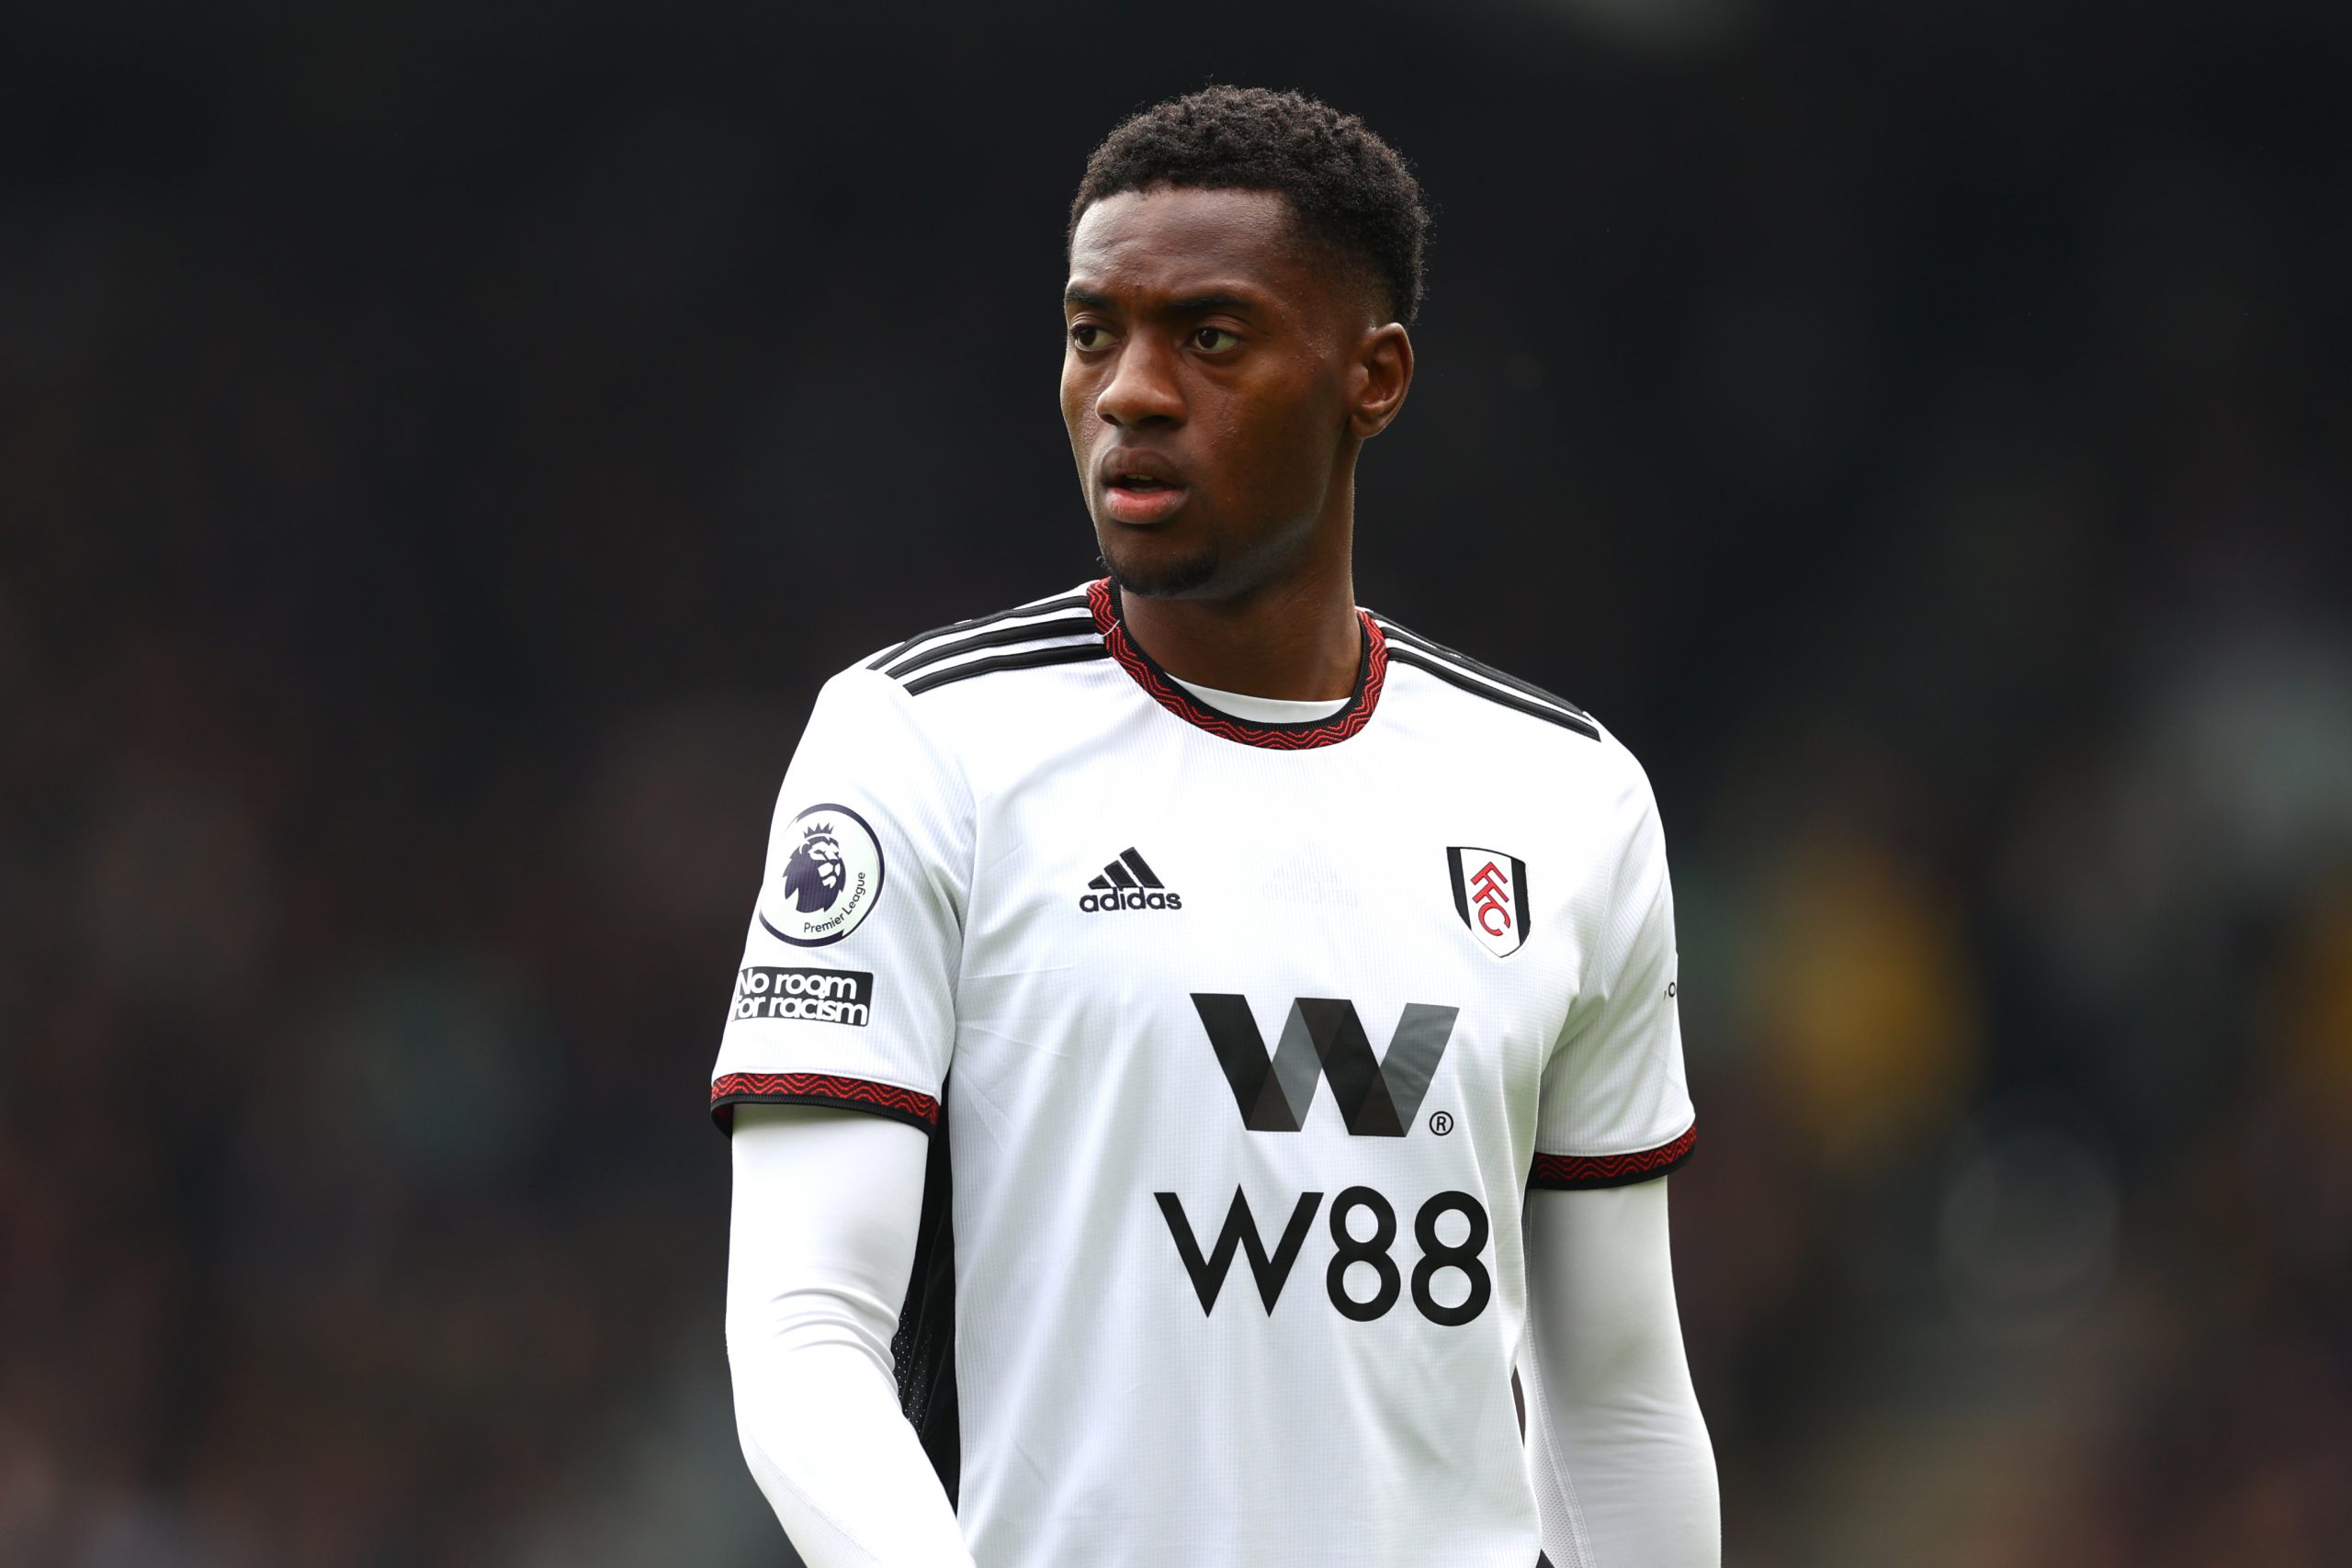 AS Monaco close to agreement with Fulham for Tottenham Hotspur target Tosin Adarabioyo.